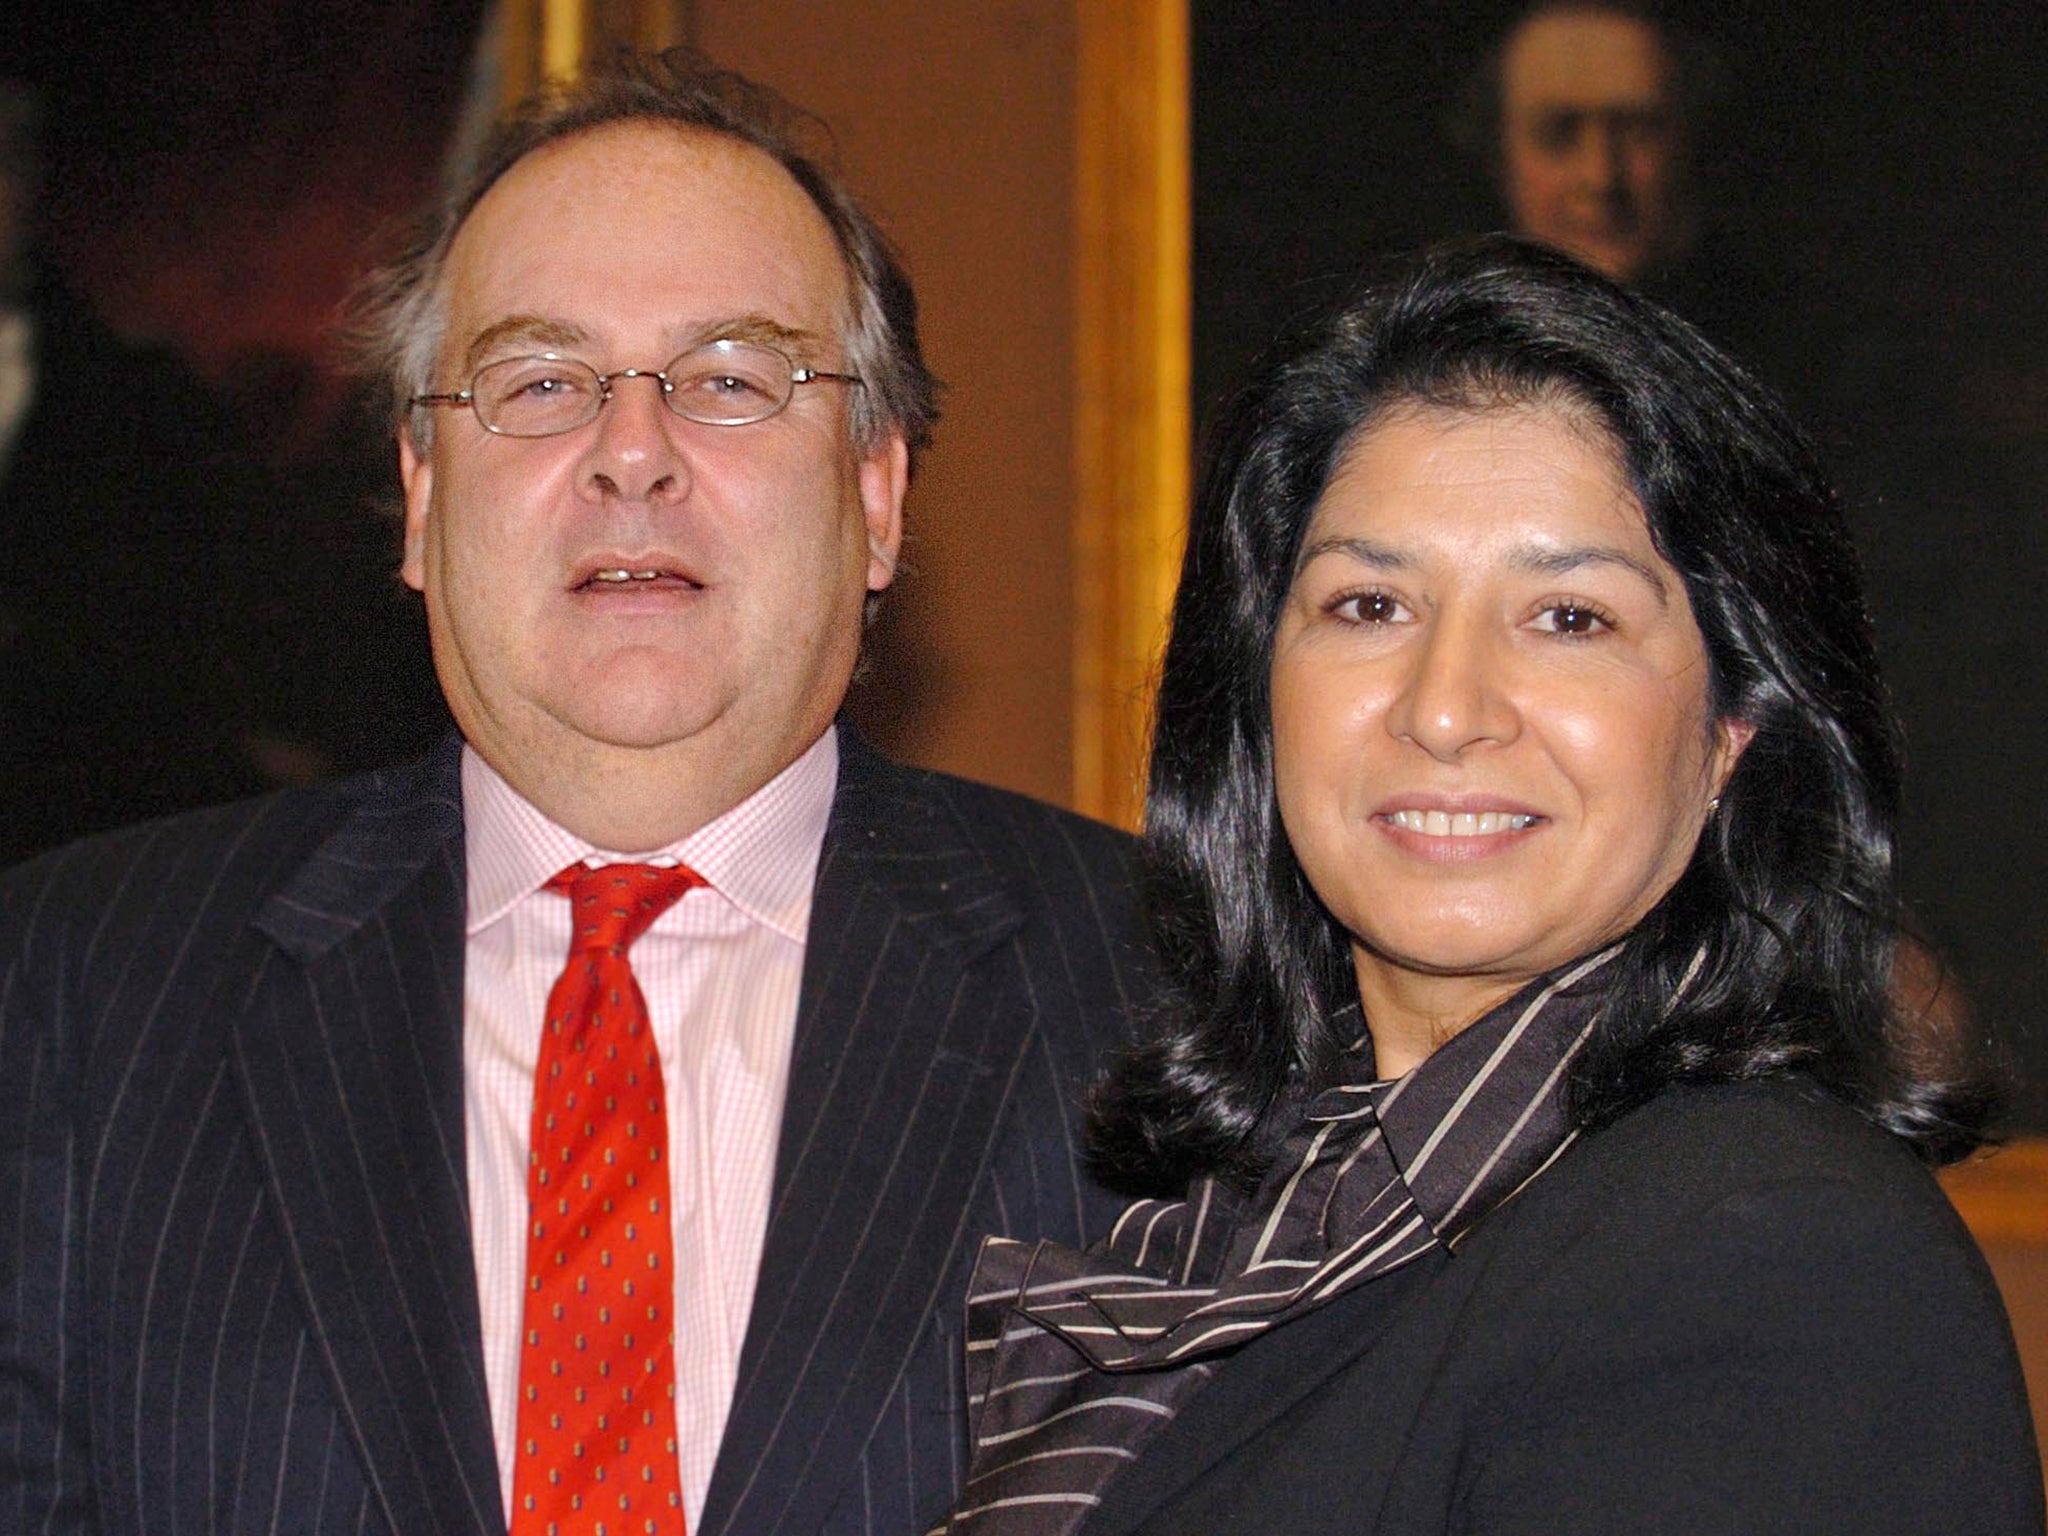 Baroness Manzoor, pictured here with Lord Falconer, is introducing a “fatal motion”